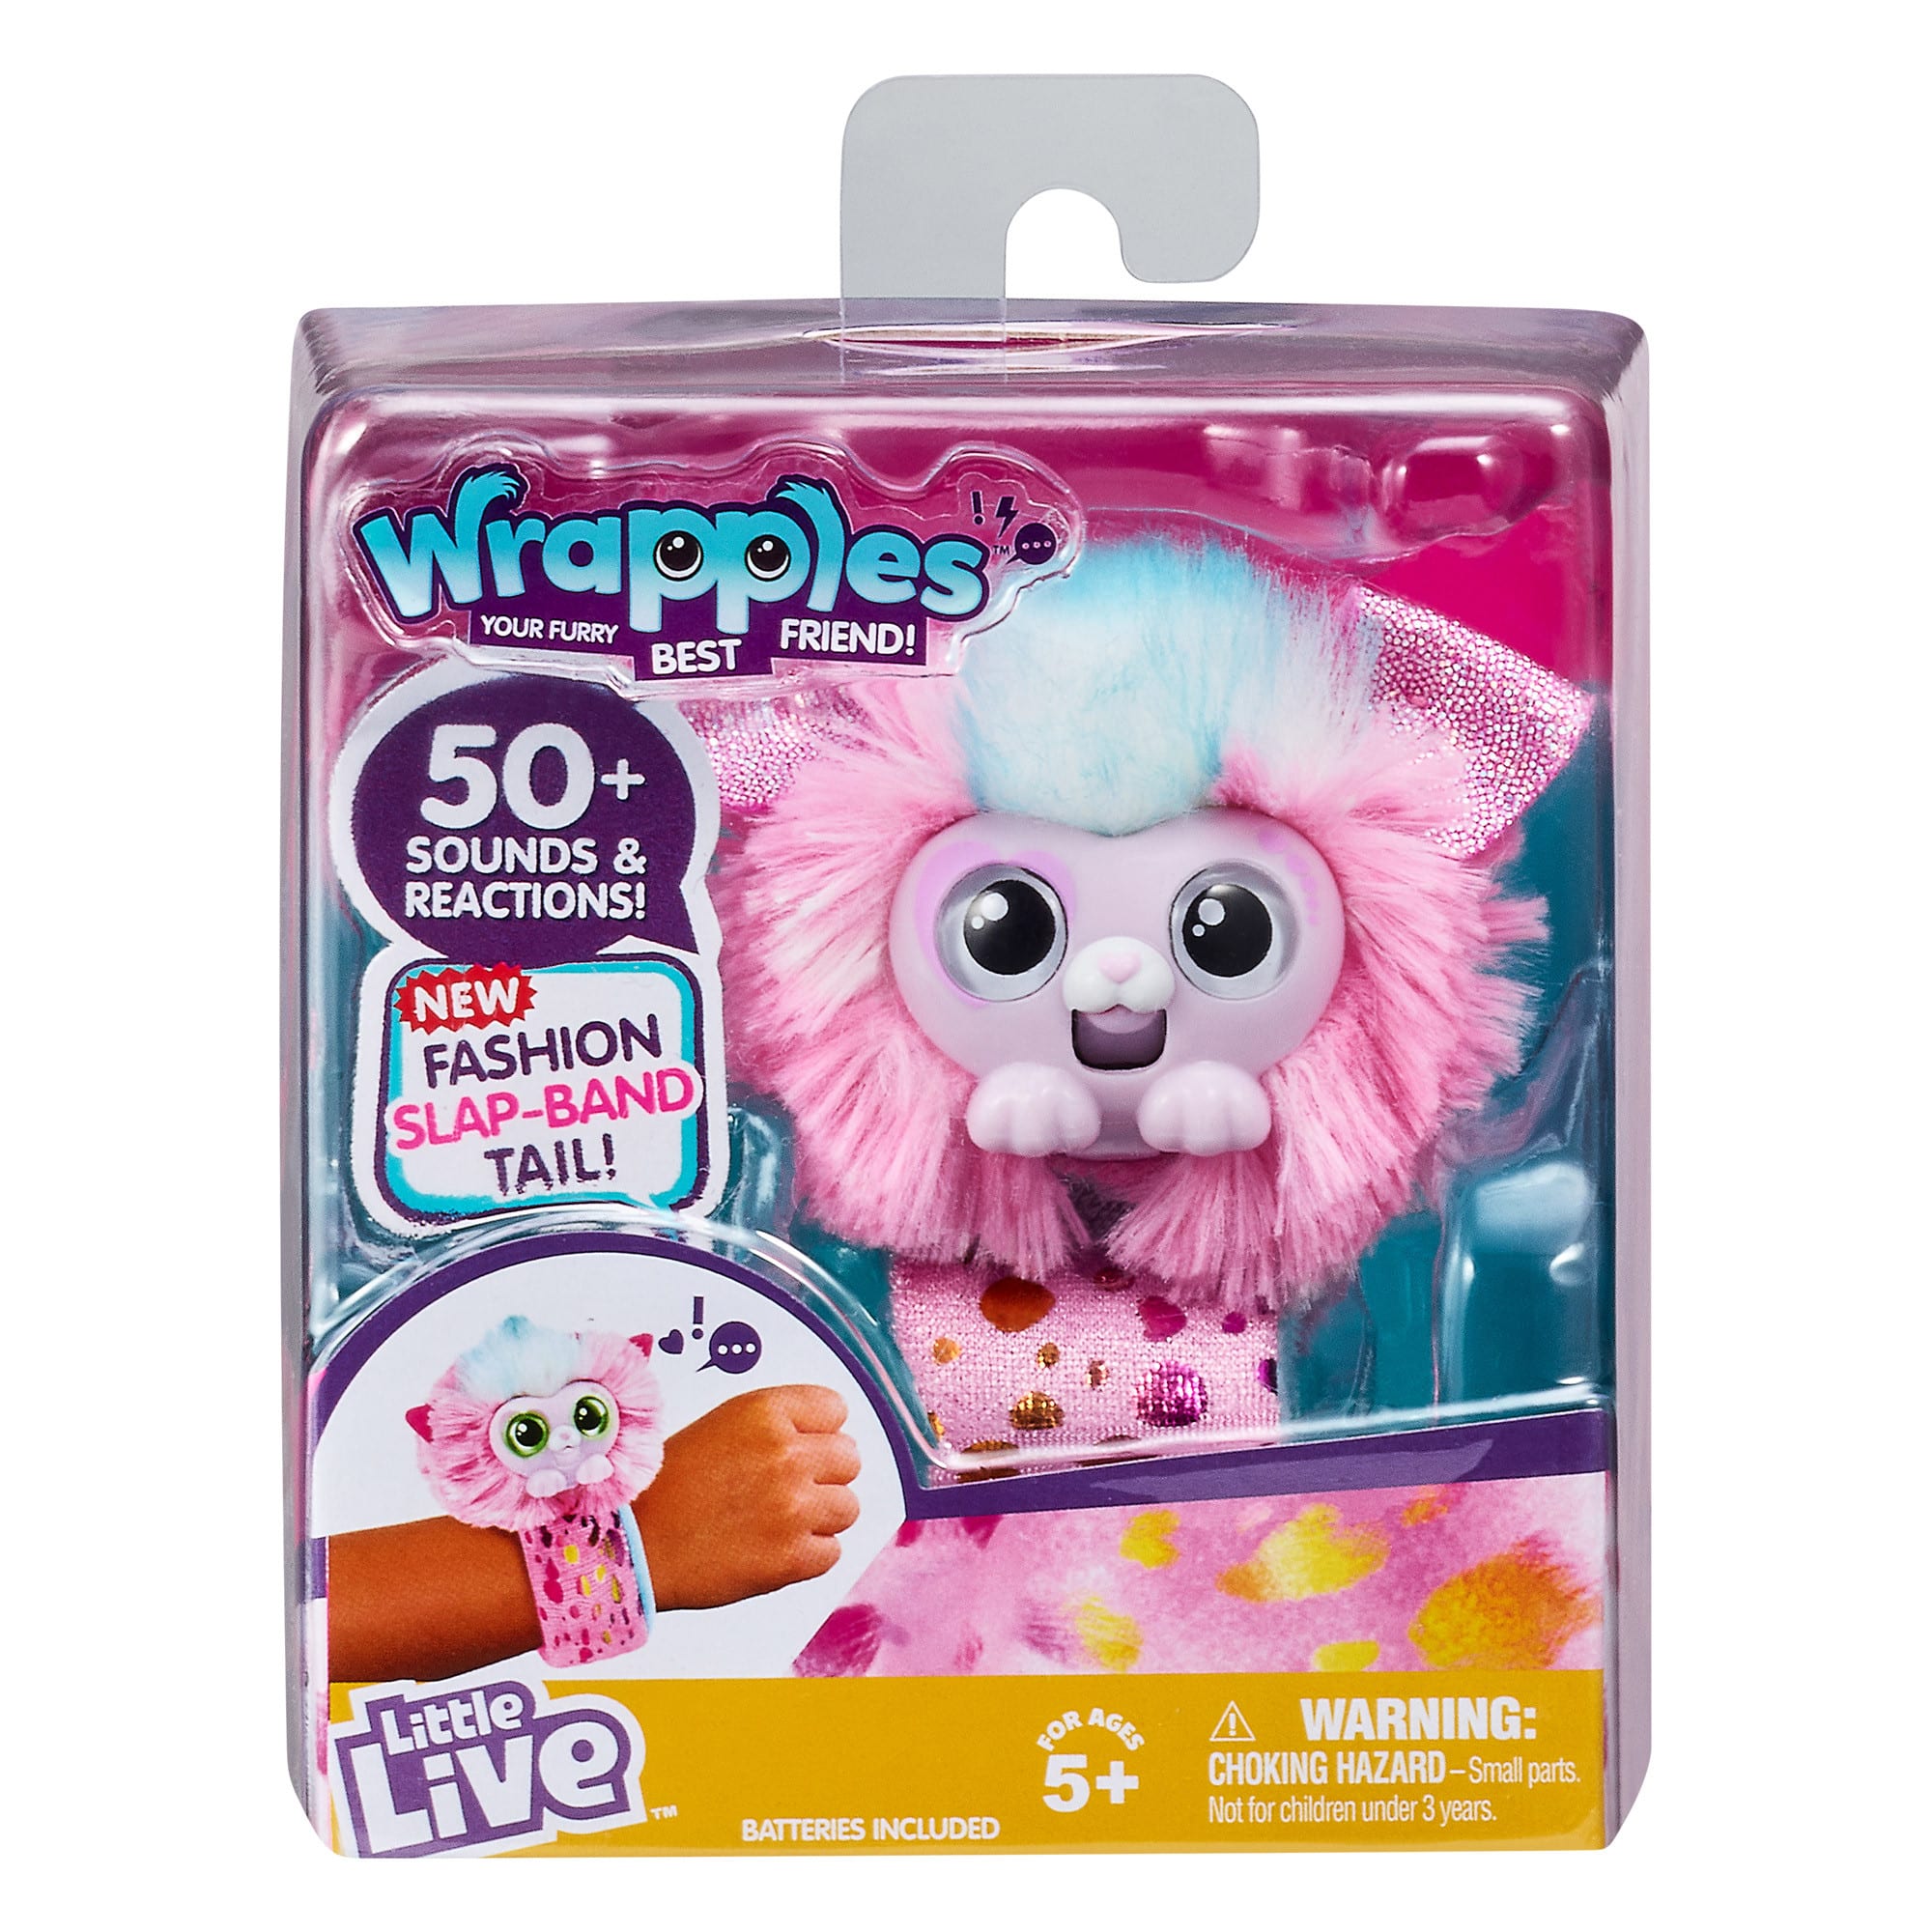 Little Live Pets - Wrapples S3 - Pinx